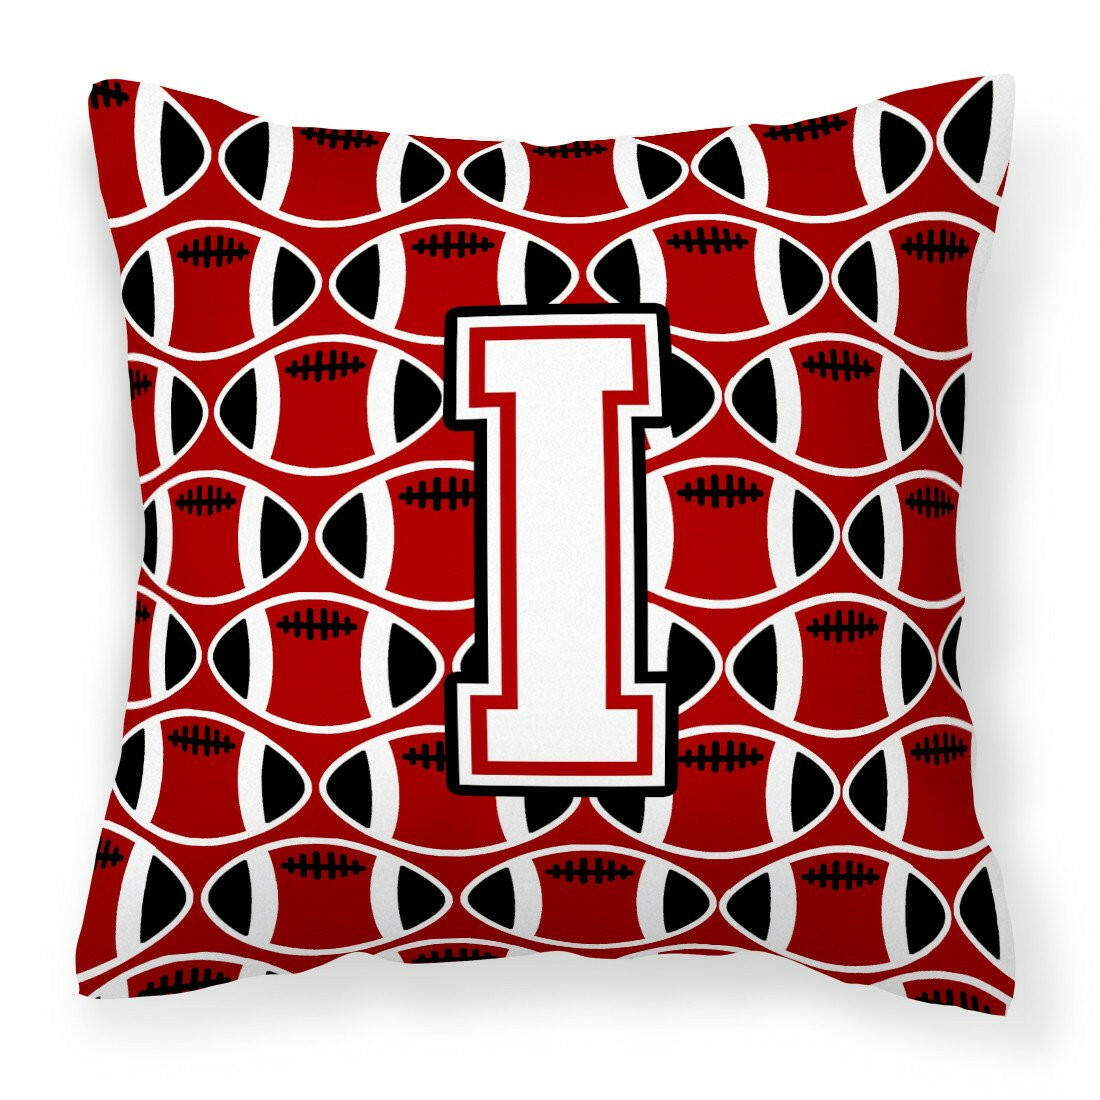 Letter I Football Cardinal and White Fabric Decorative Pillow CJ1082-IPW1414 by Caroline's Treasures